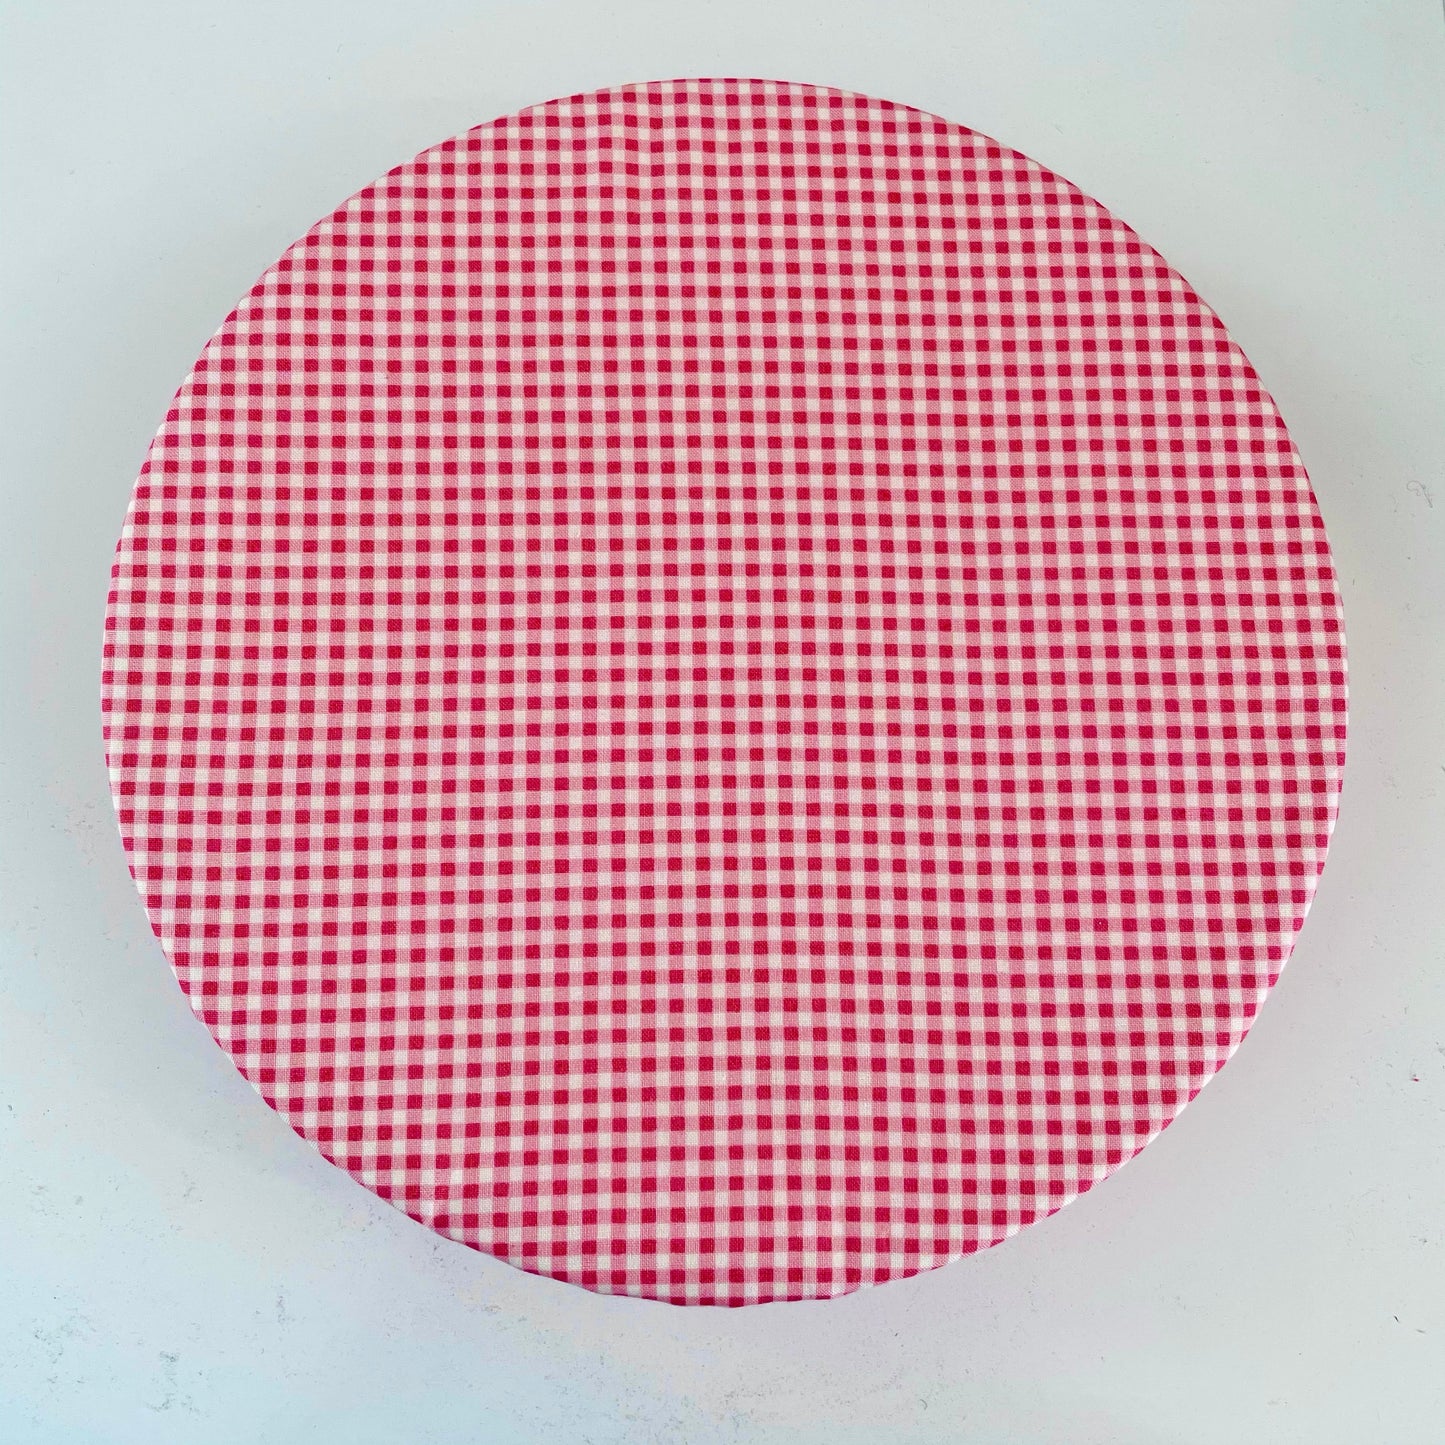 Stand Mixer Bowl Covers - Pink and White Gingham Tiny Check